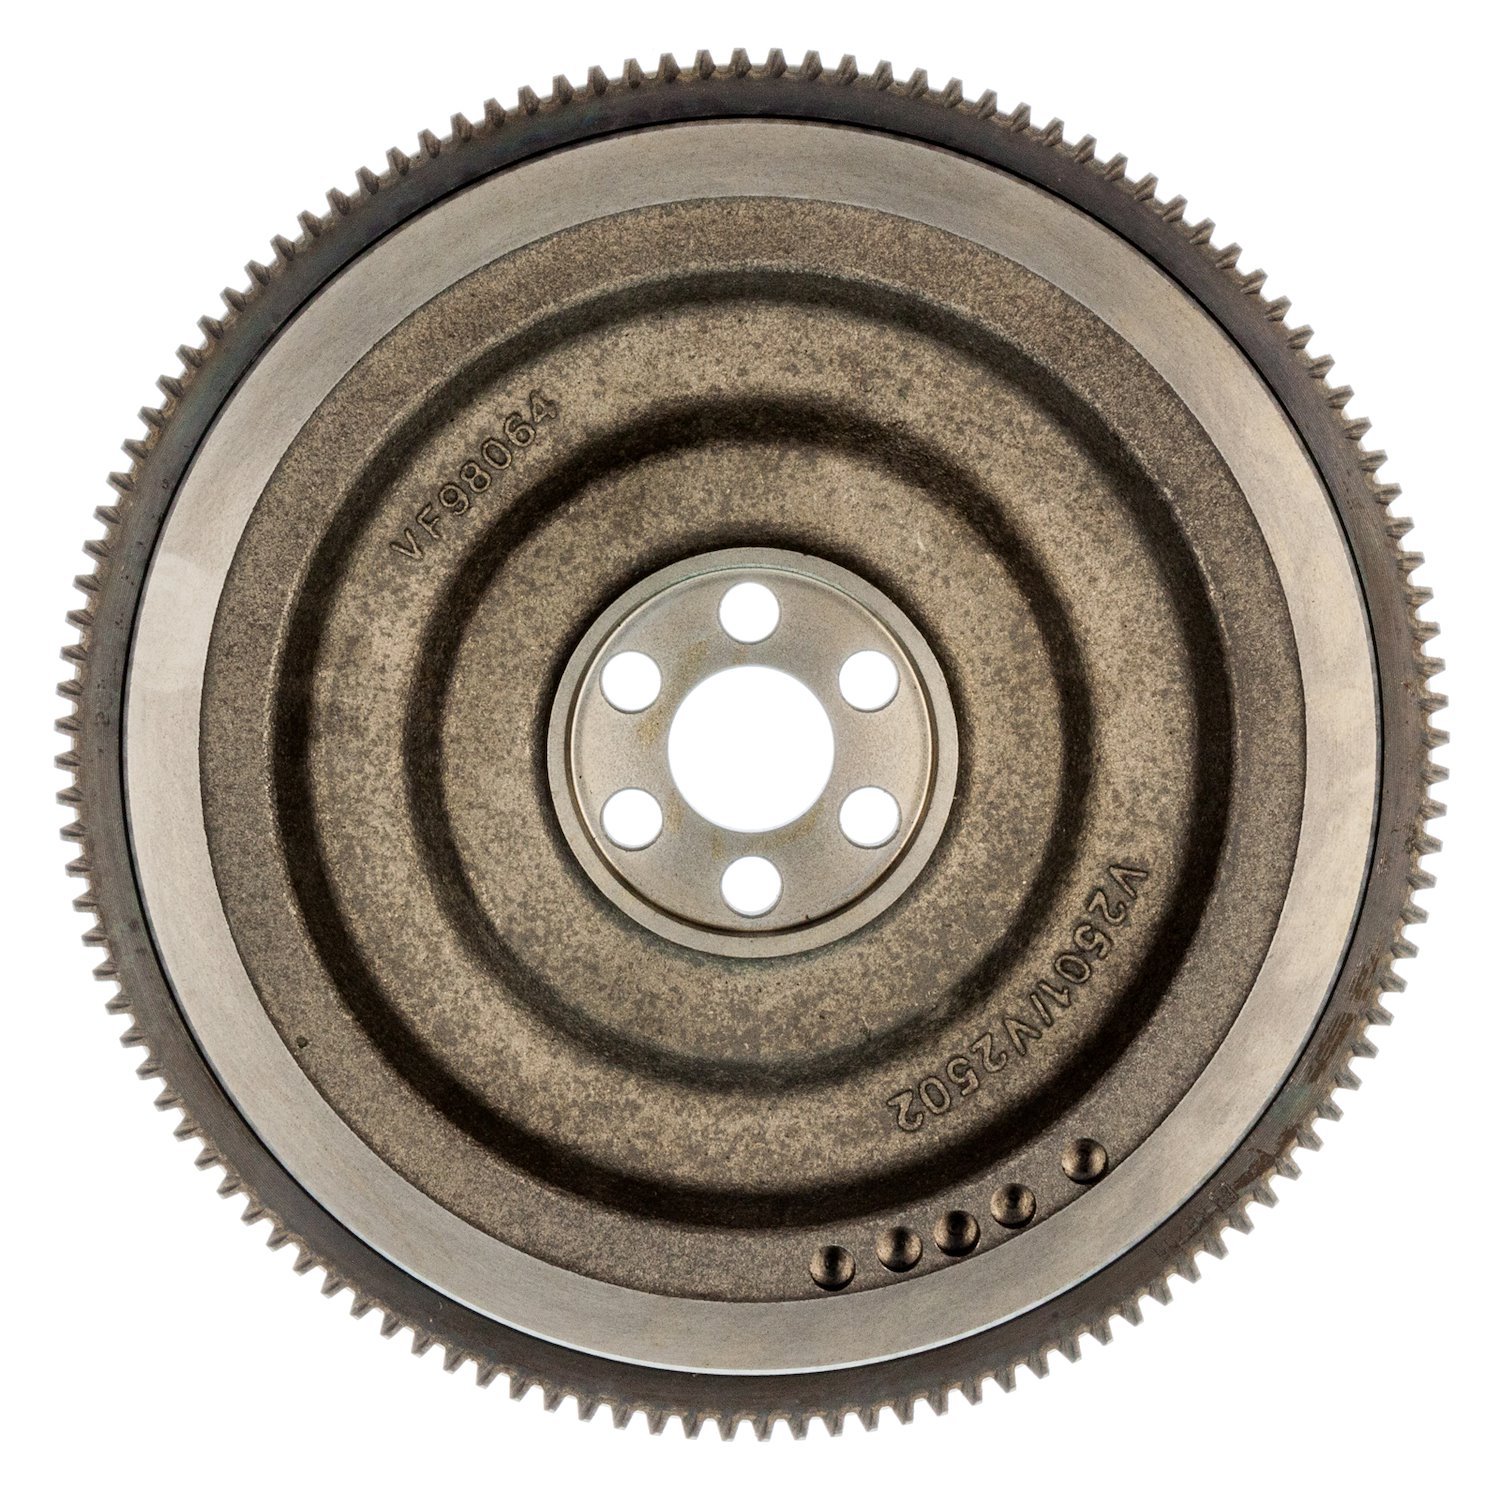 FWNS27 OEM Replacement Flywheel, 1986-1989 Nissan D21 V6